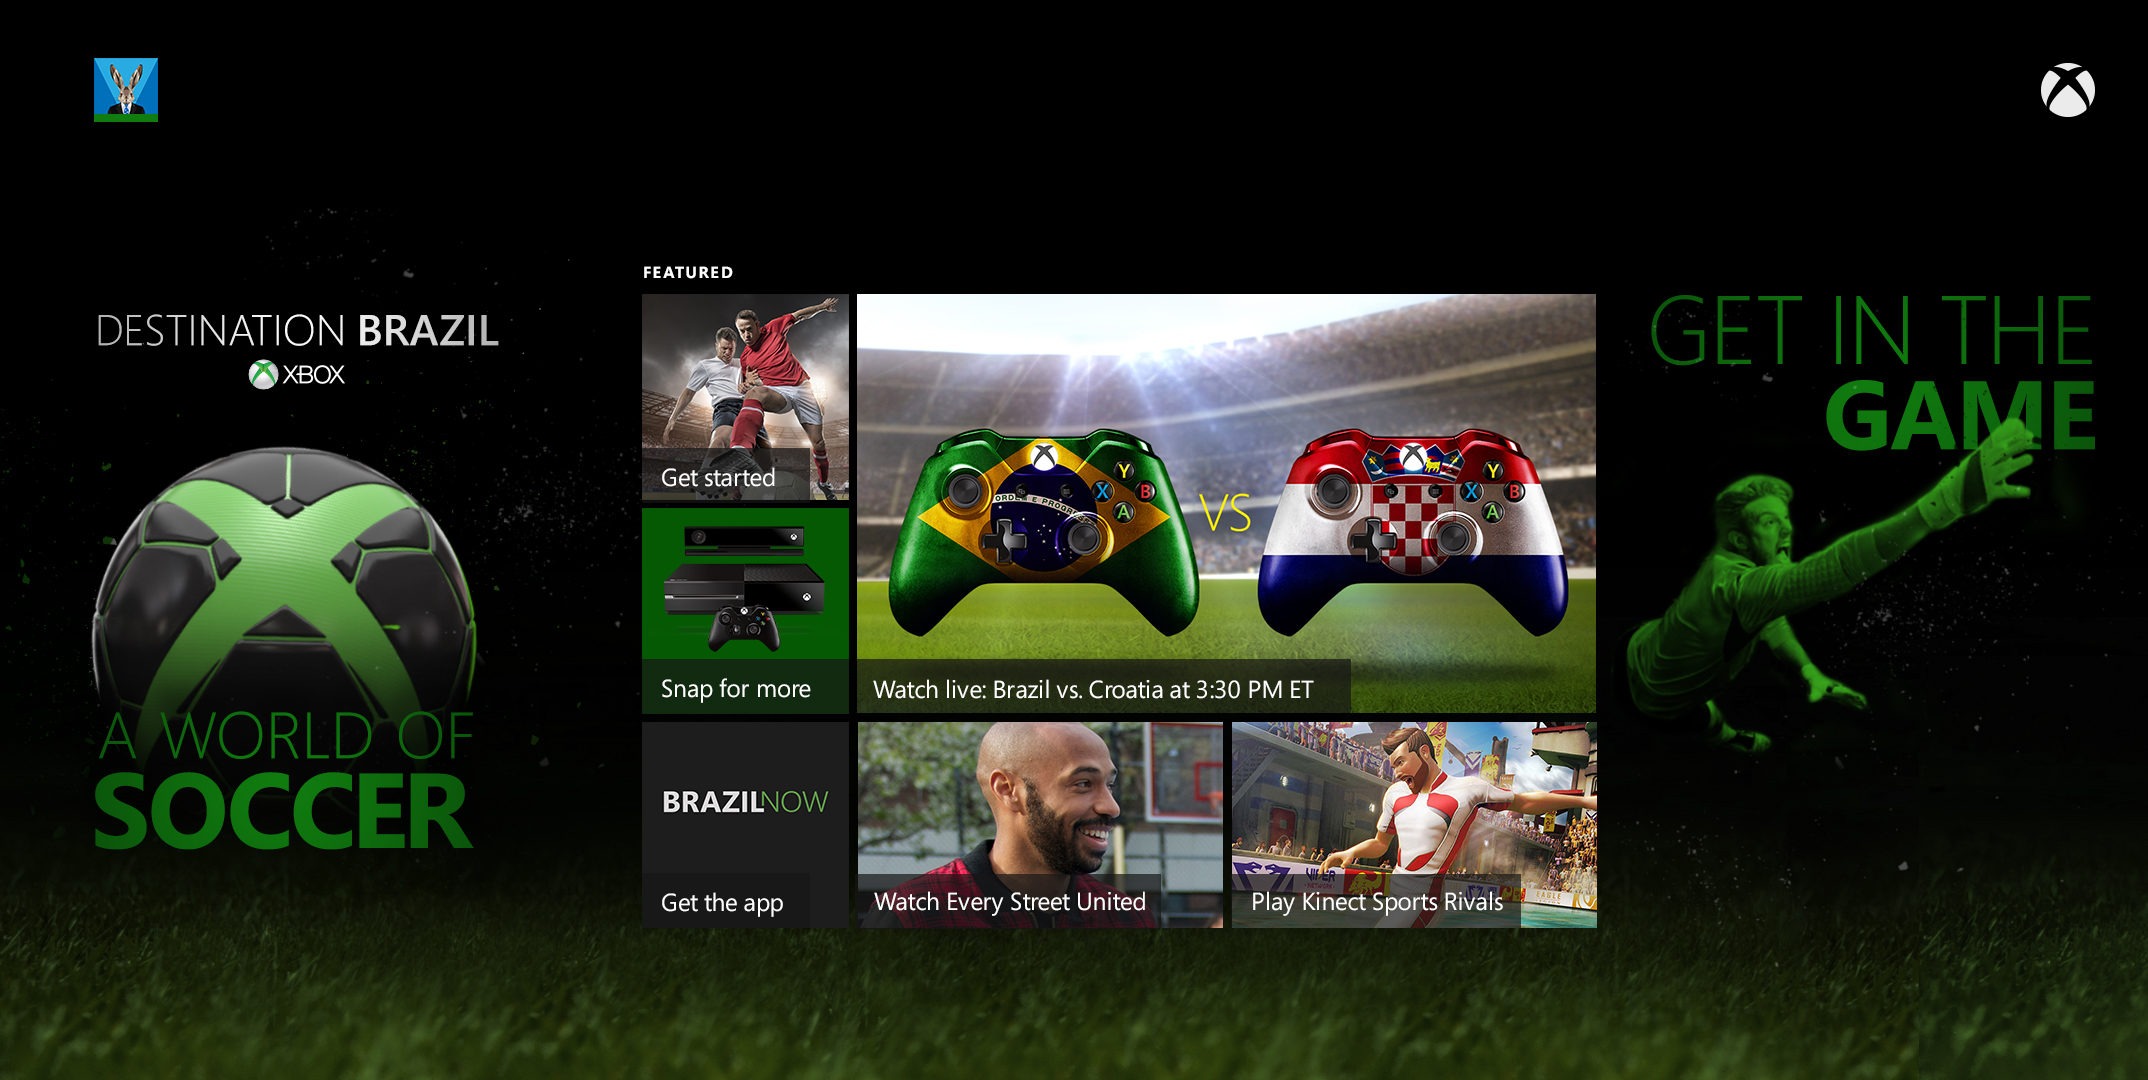 Brazil Now is powered by Bing and delivers real-time data, streamed live from the cloud, for the whole tournament 